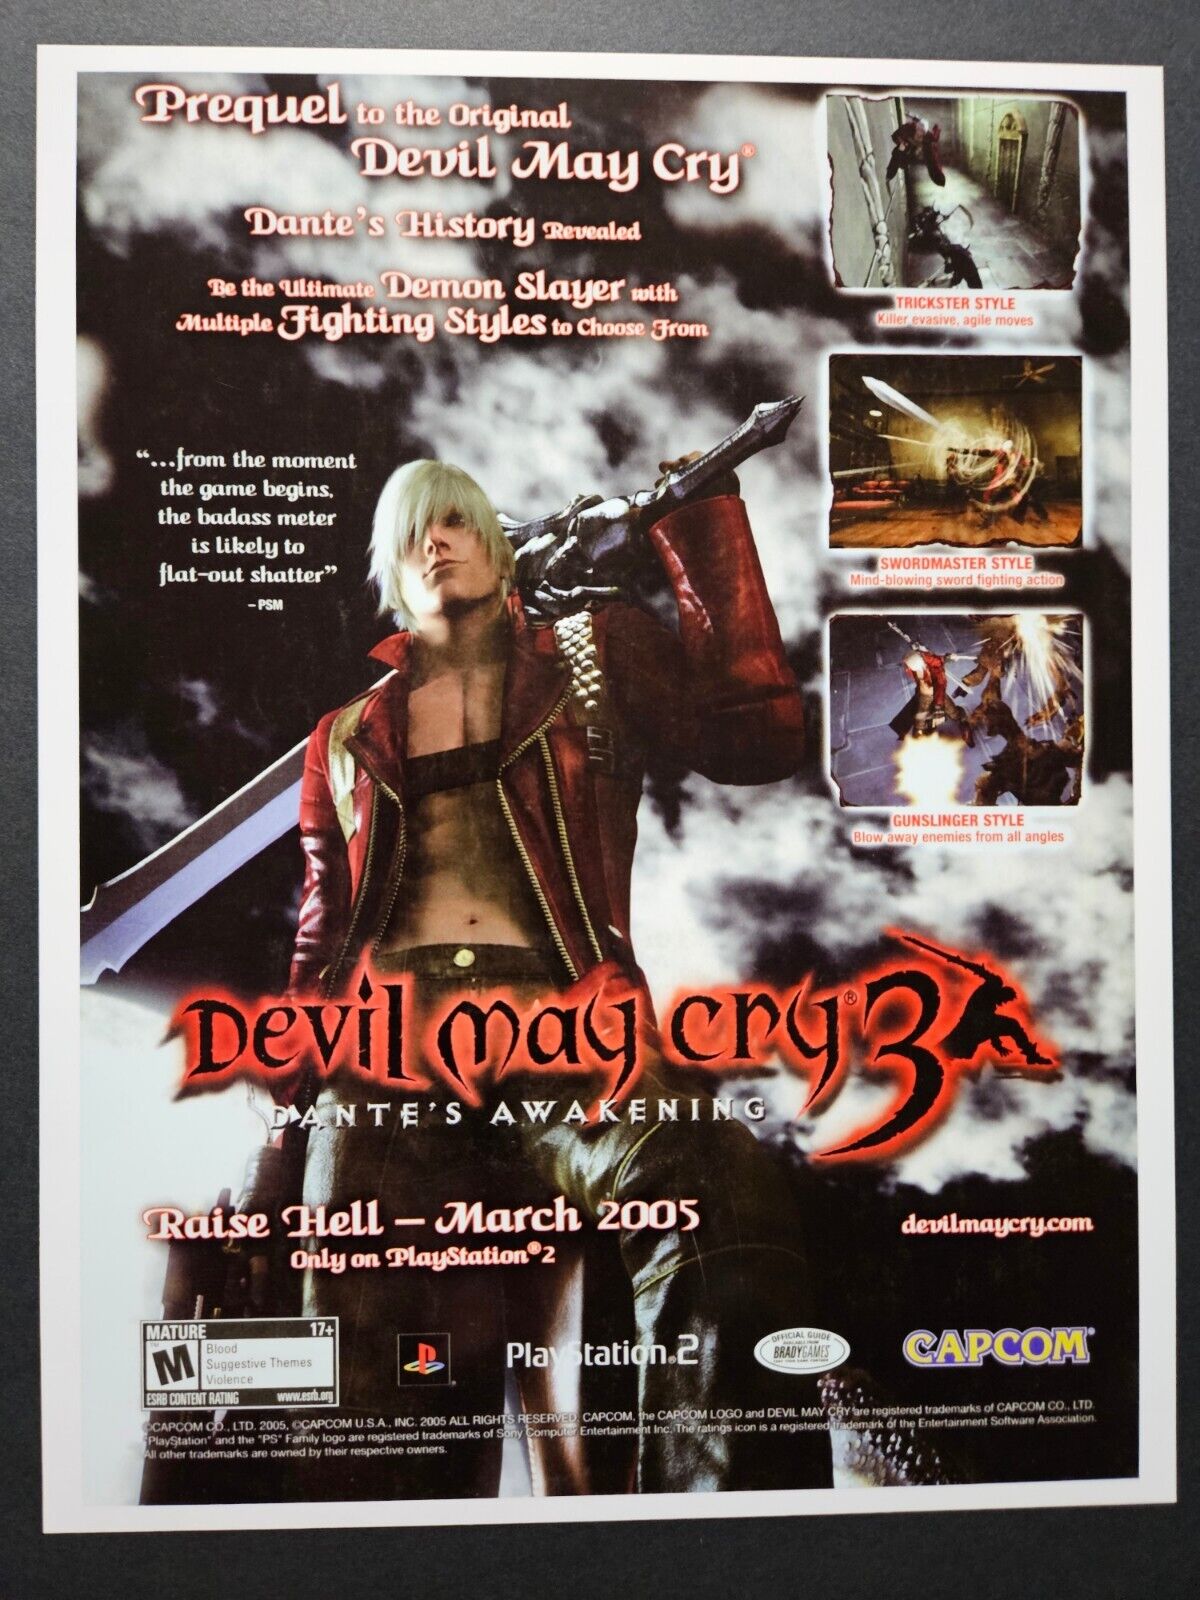 Devil May Cry 3 Sony Playstation 2 PS2 2005 DMC Promotional Ad Art Print Poster